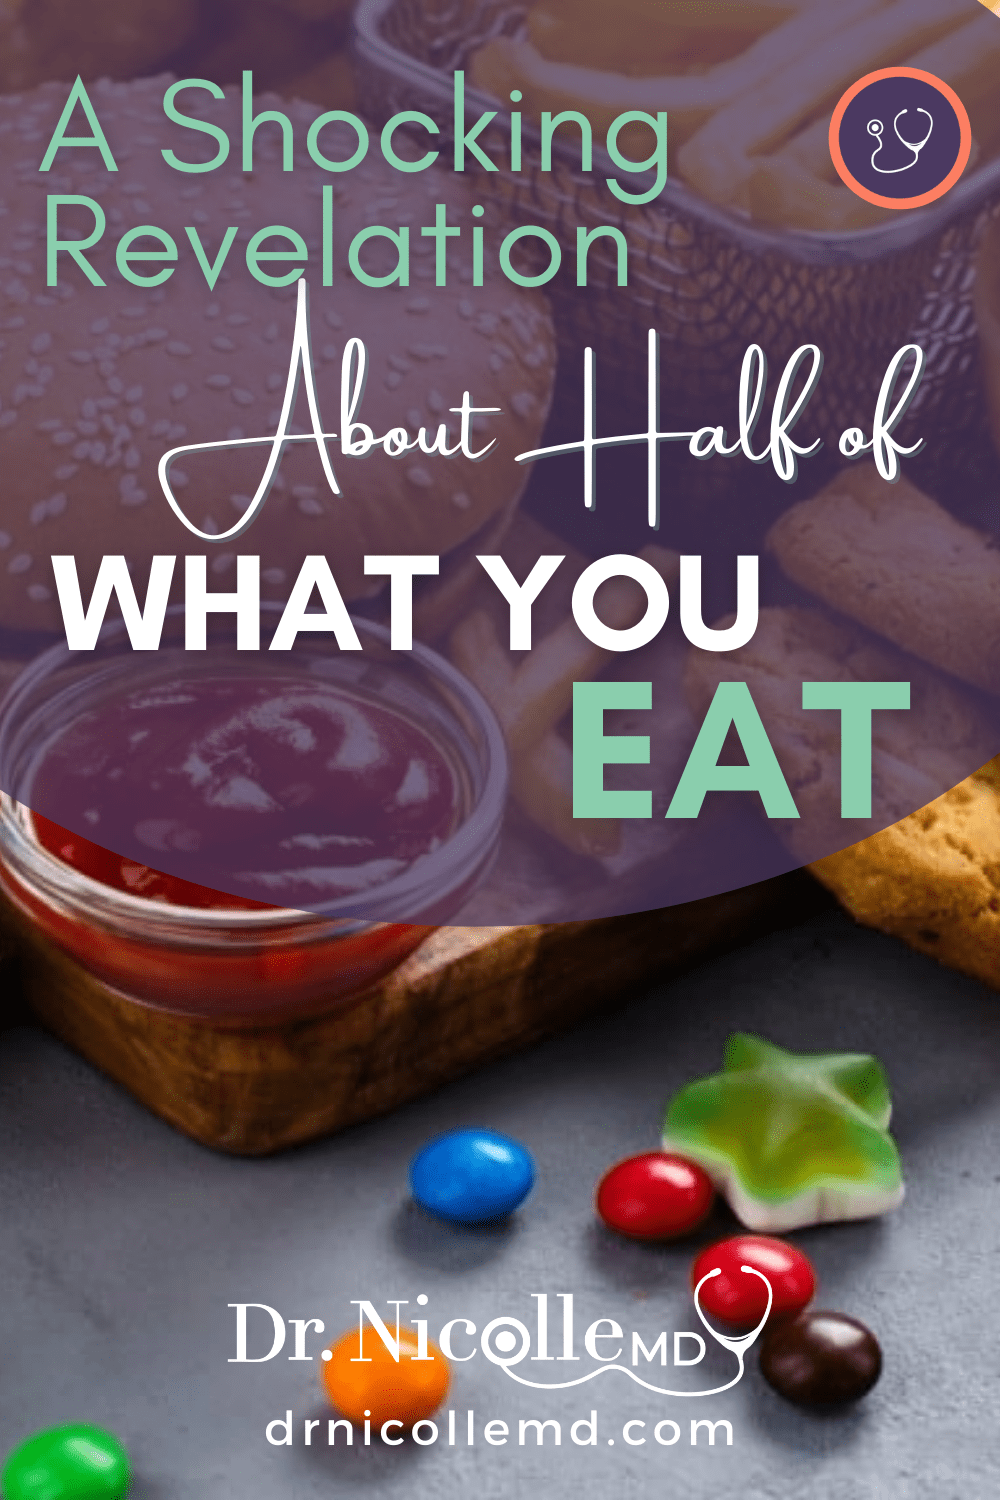 A Shocking Revelation About Half of What You Eat